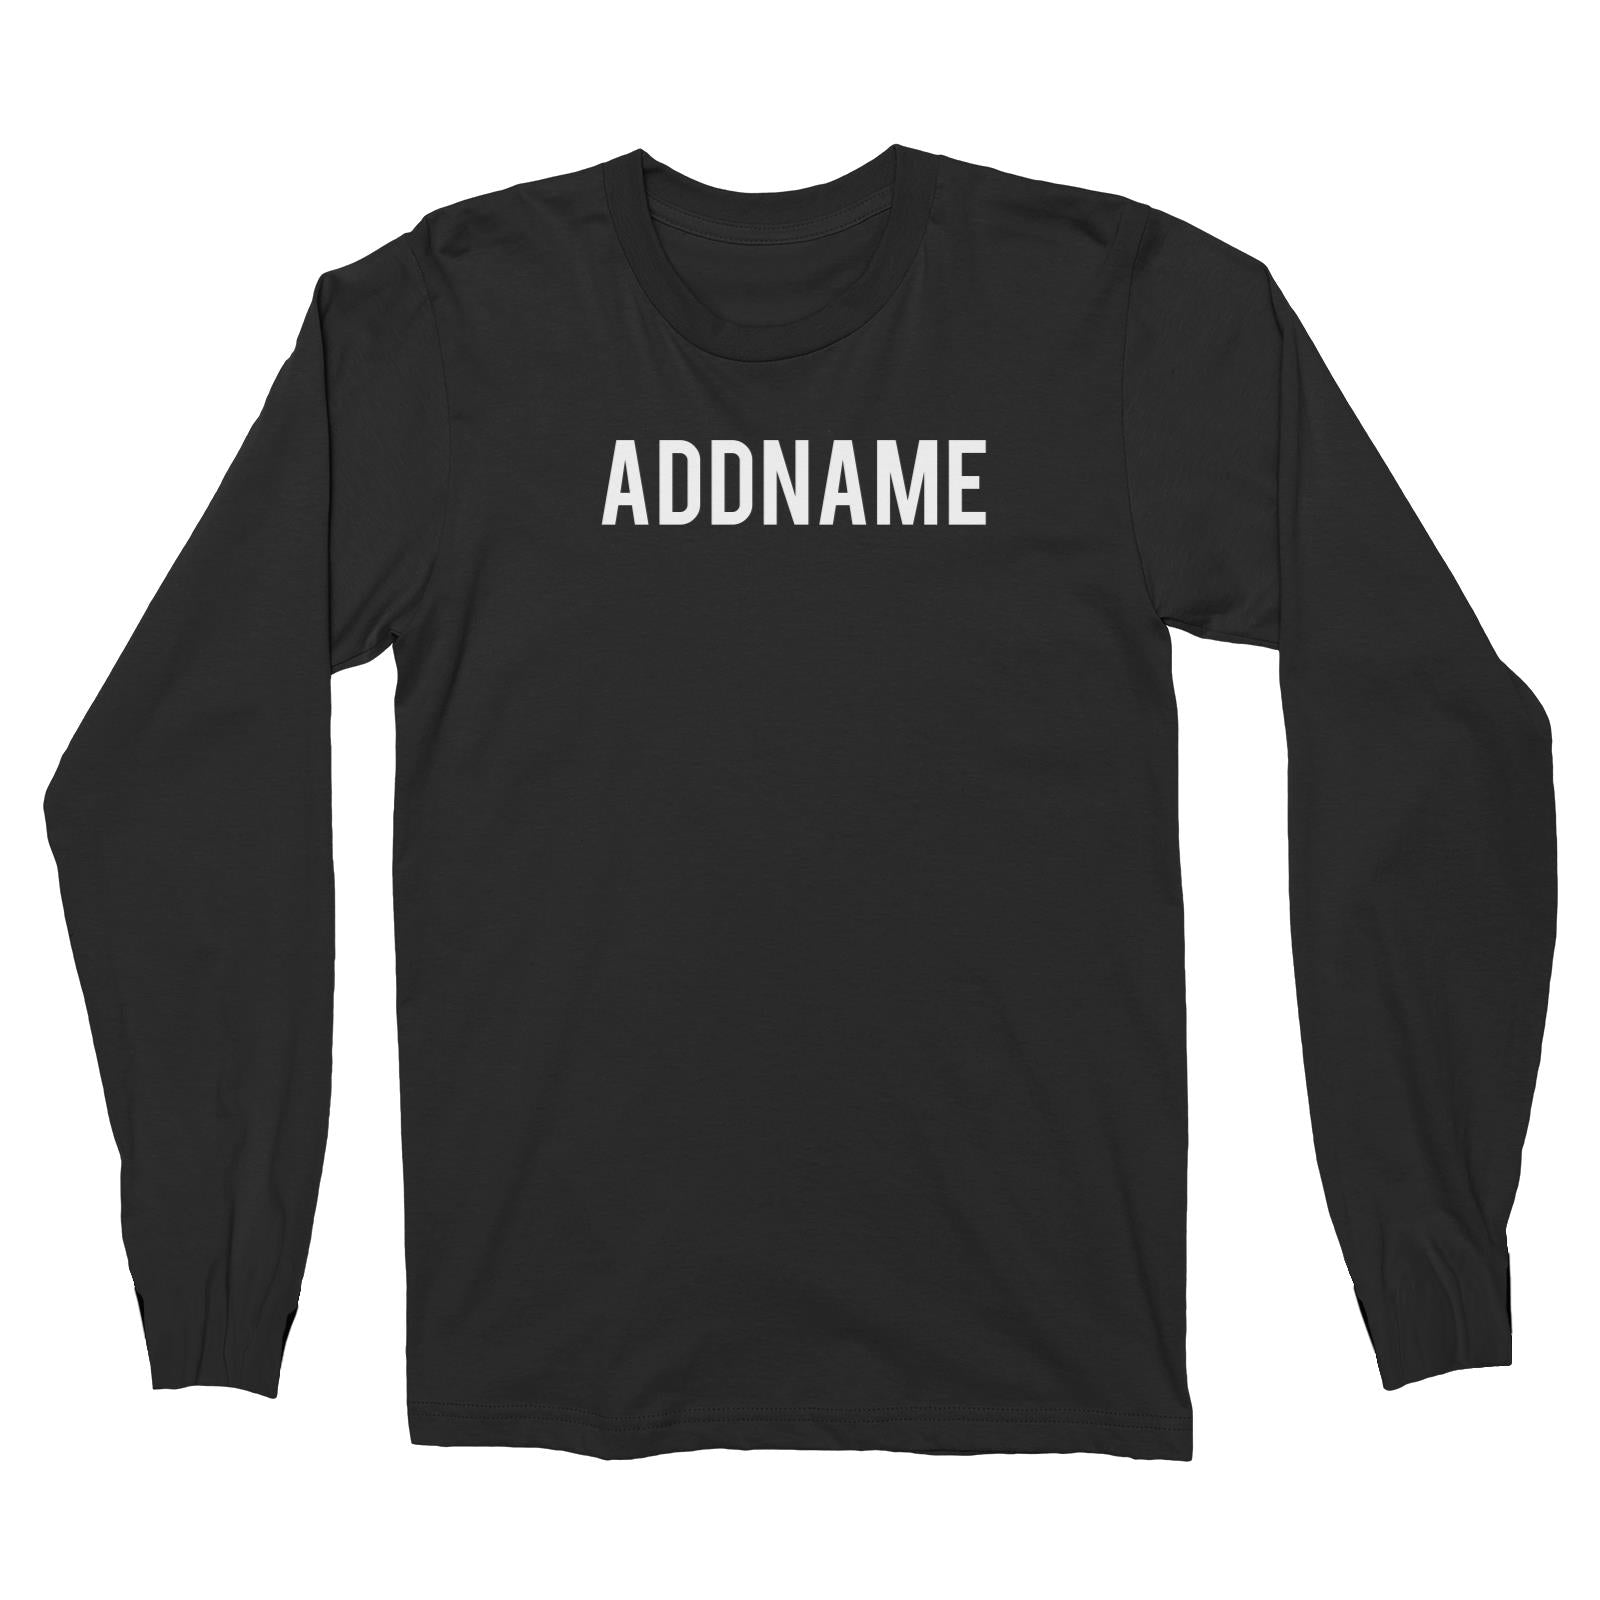 If Lost Return To Addname Original Long Sleeve Unisex T-Shirt